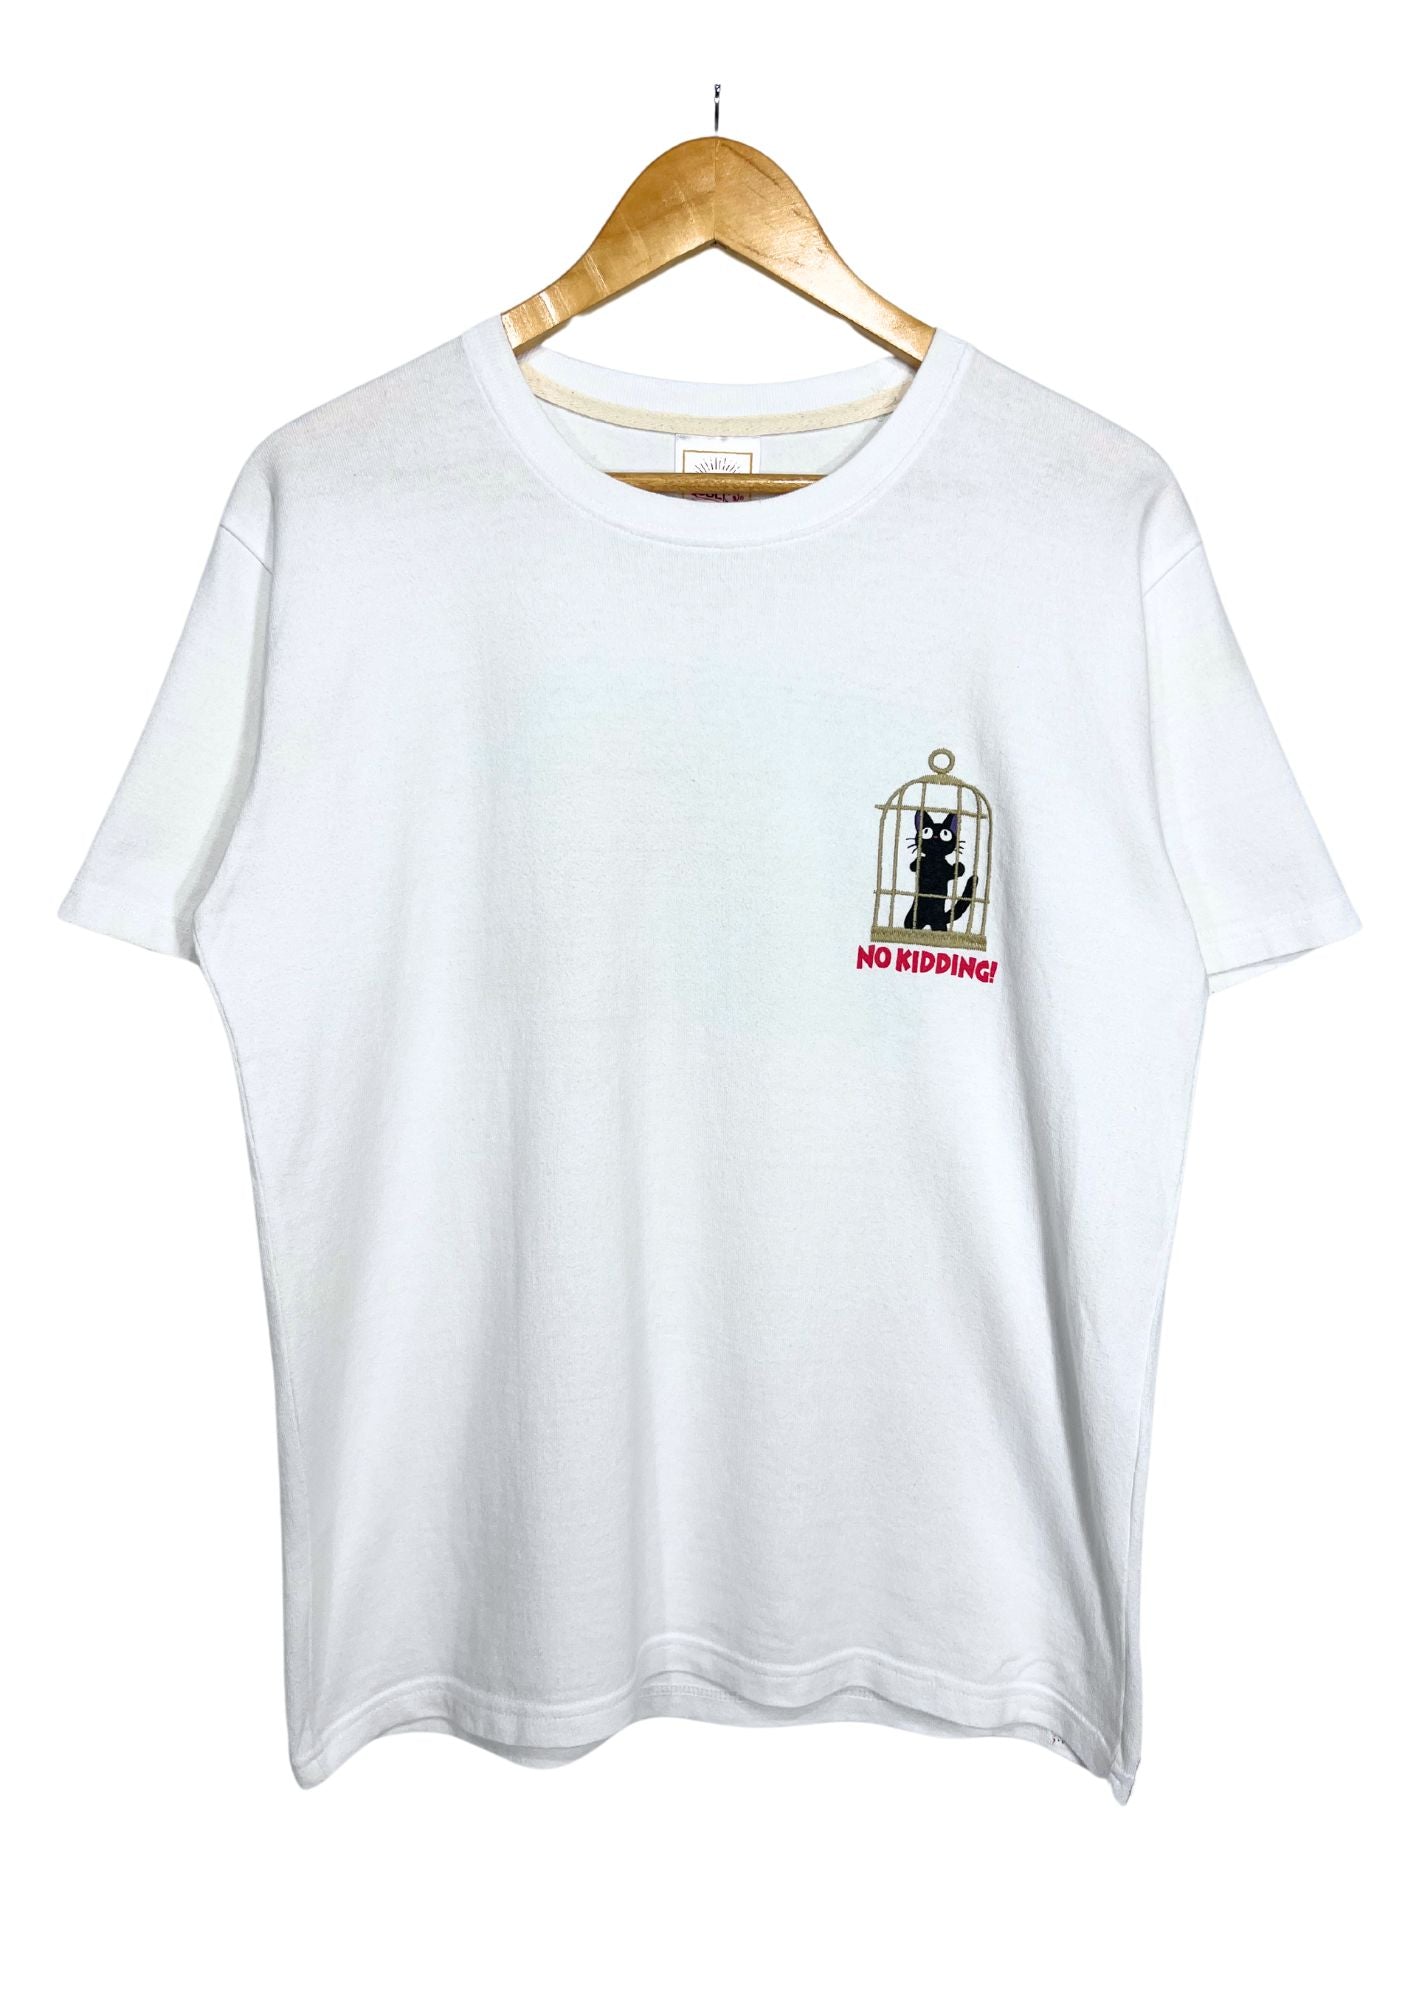 2019 Studio Ghibli Kiki's Delivery Service x GBL You're Late! Embroidered T-shirt